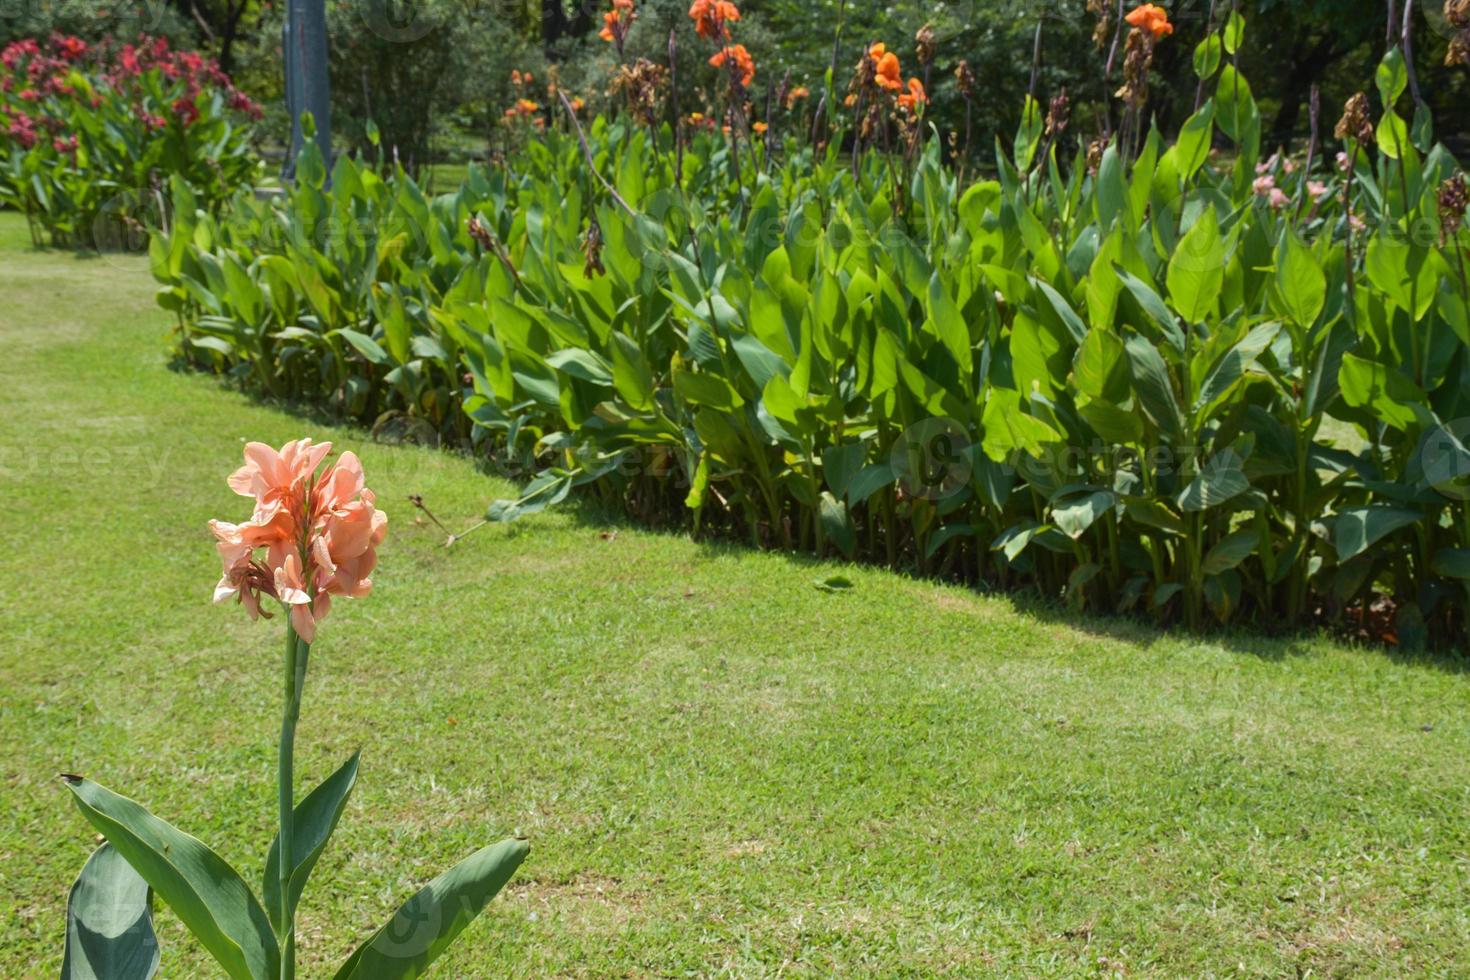 Canna flower field with beautiful colors blooming in the garden photo